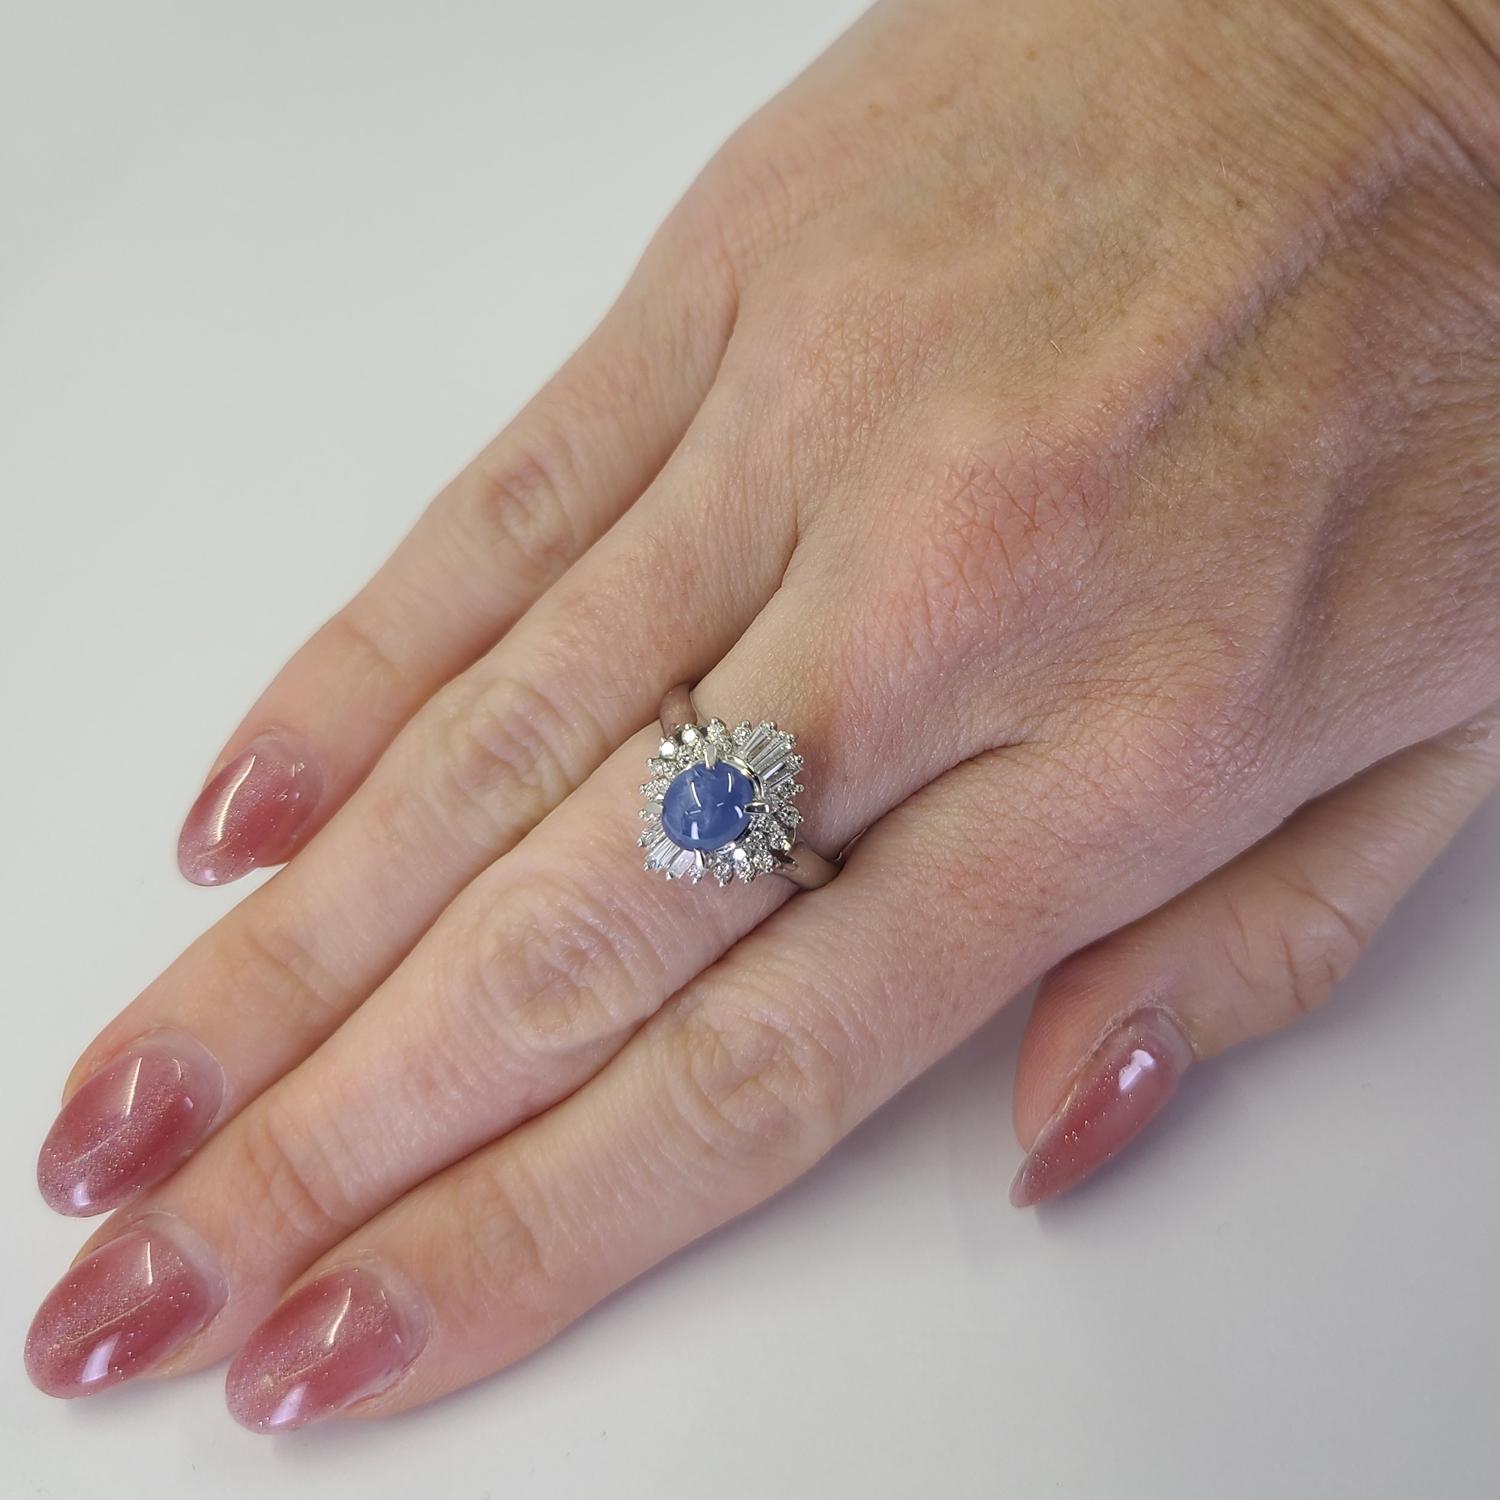 Elegant Platinum Ballerina Ring Featuring A 1.43 Carat Oval Star Sapphire with Crisp Ray Lines. Center Stone is Accented By 0.52 Carat Total Weight Round and Tapered Baguette Cut Diamonds of VS Clarity and G/H Color. Current Finger Size is 6.25;